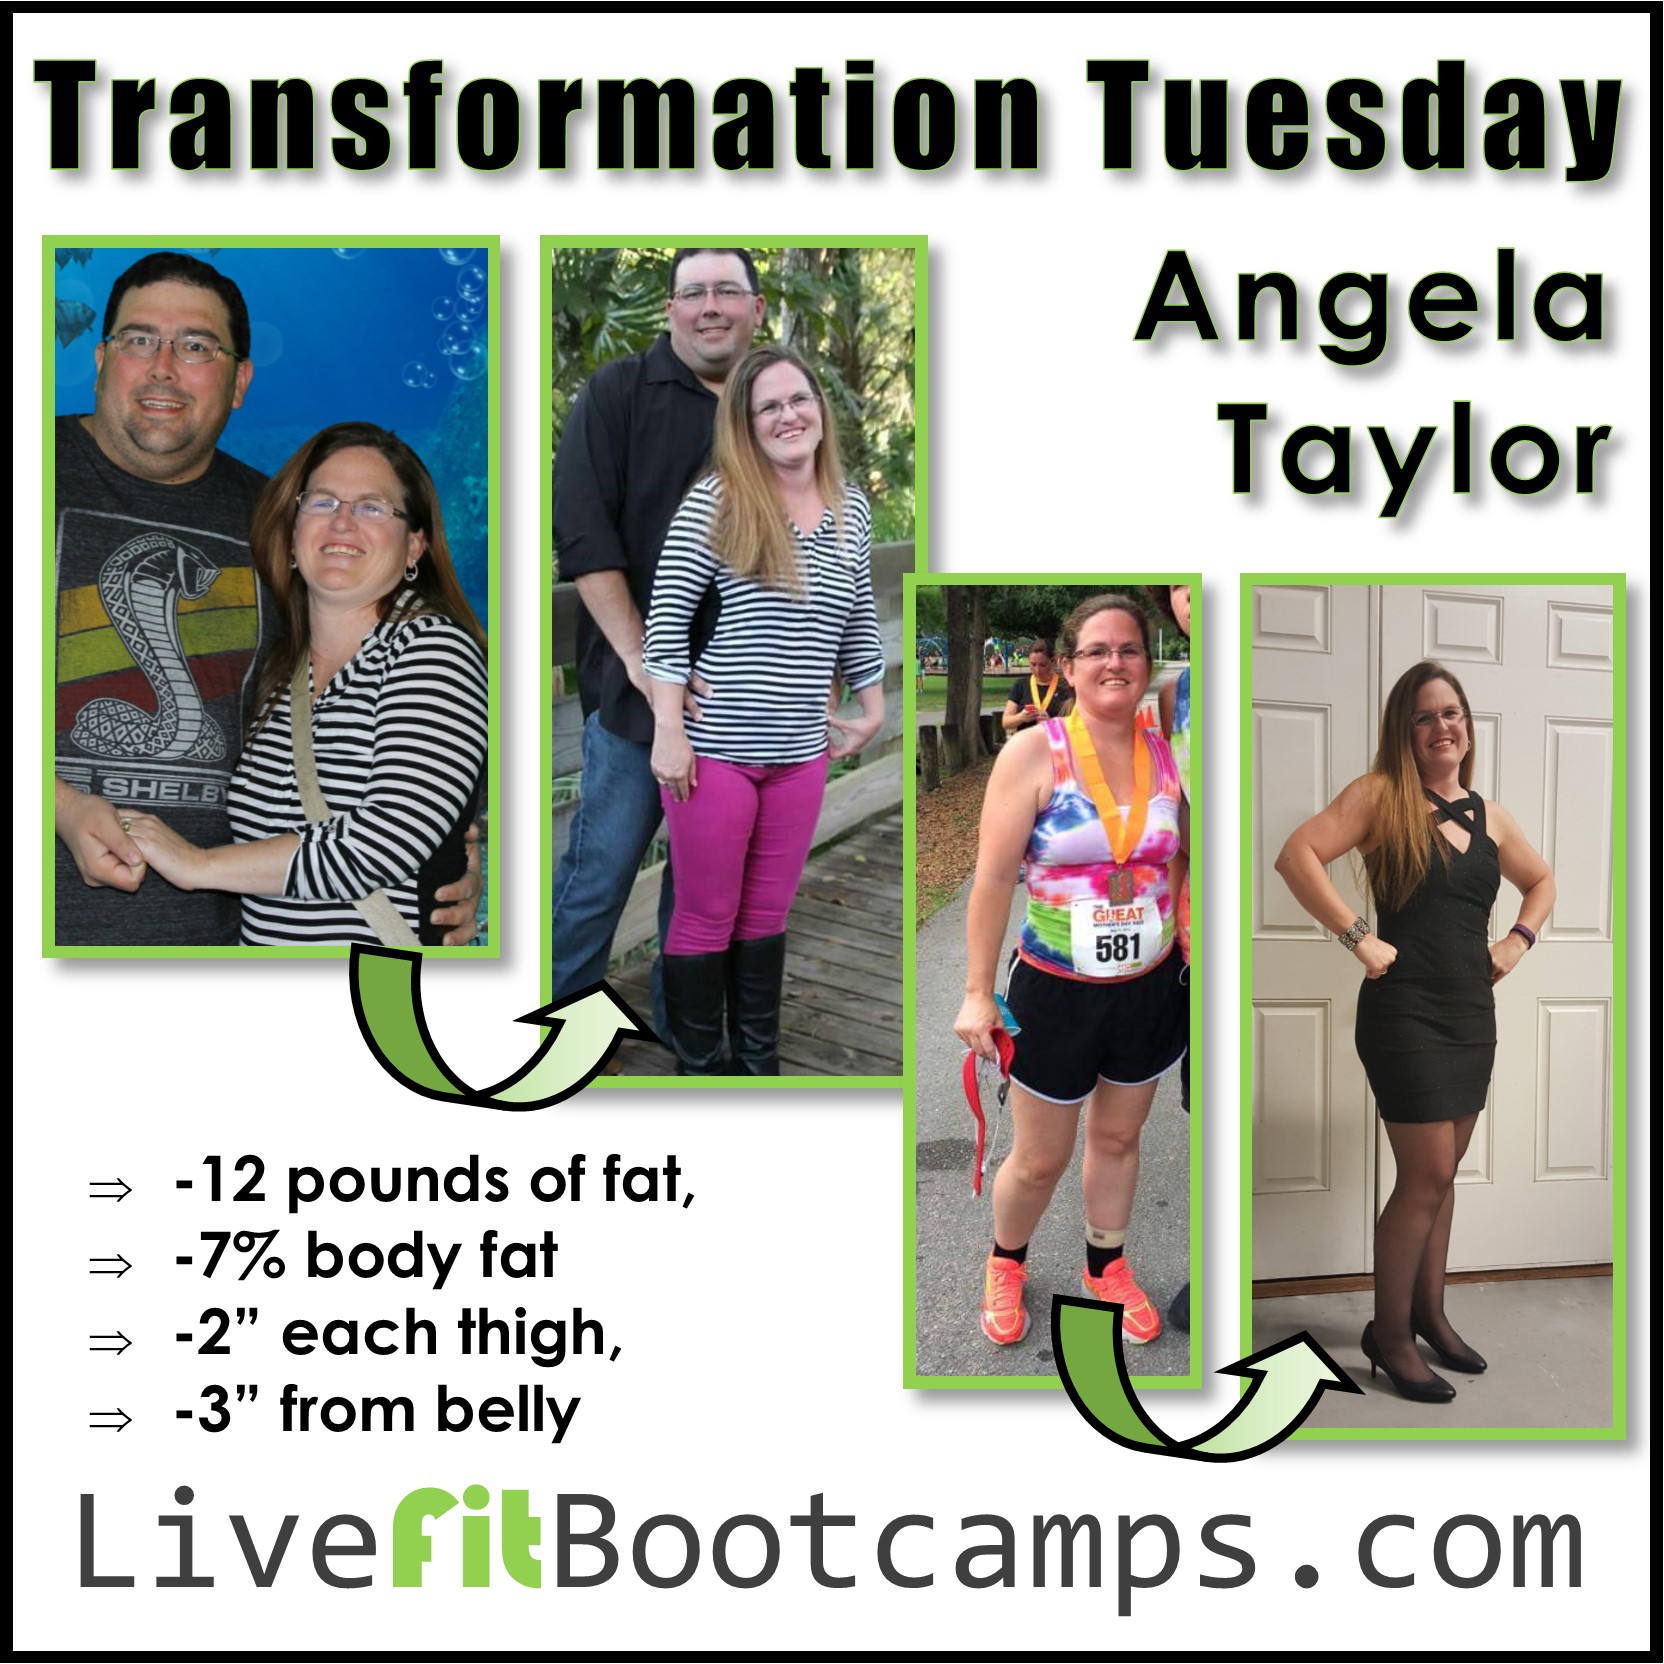 You can’t complain if you don’t ACT! (Angela’s Transformation Story)